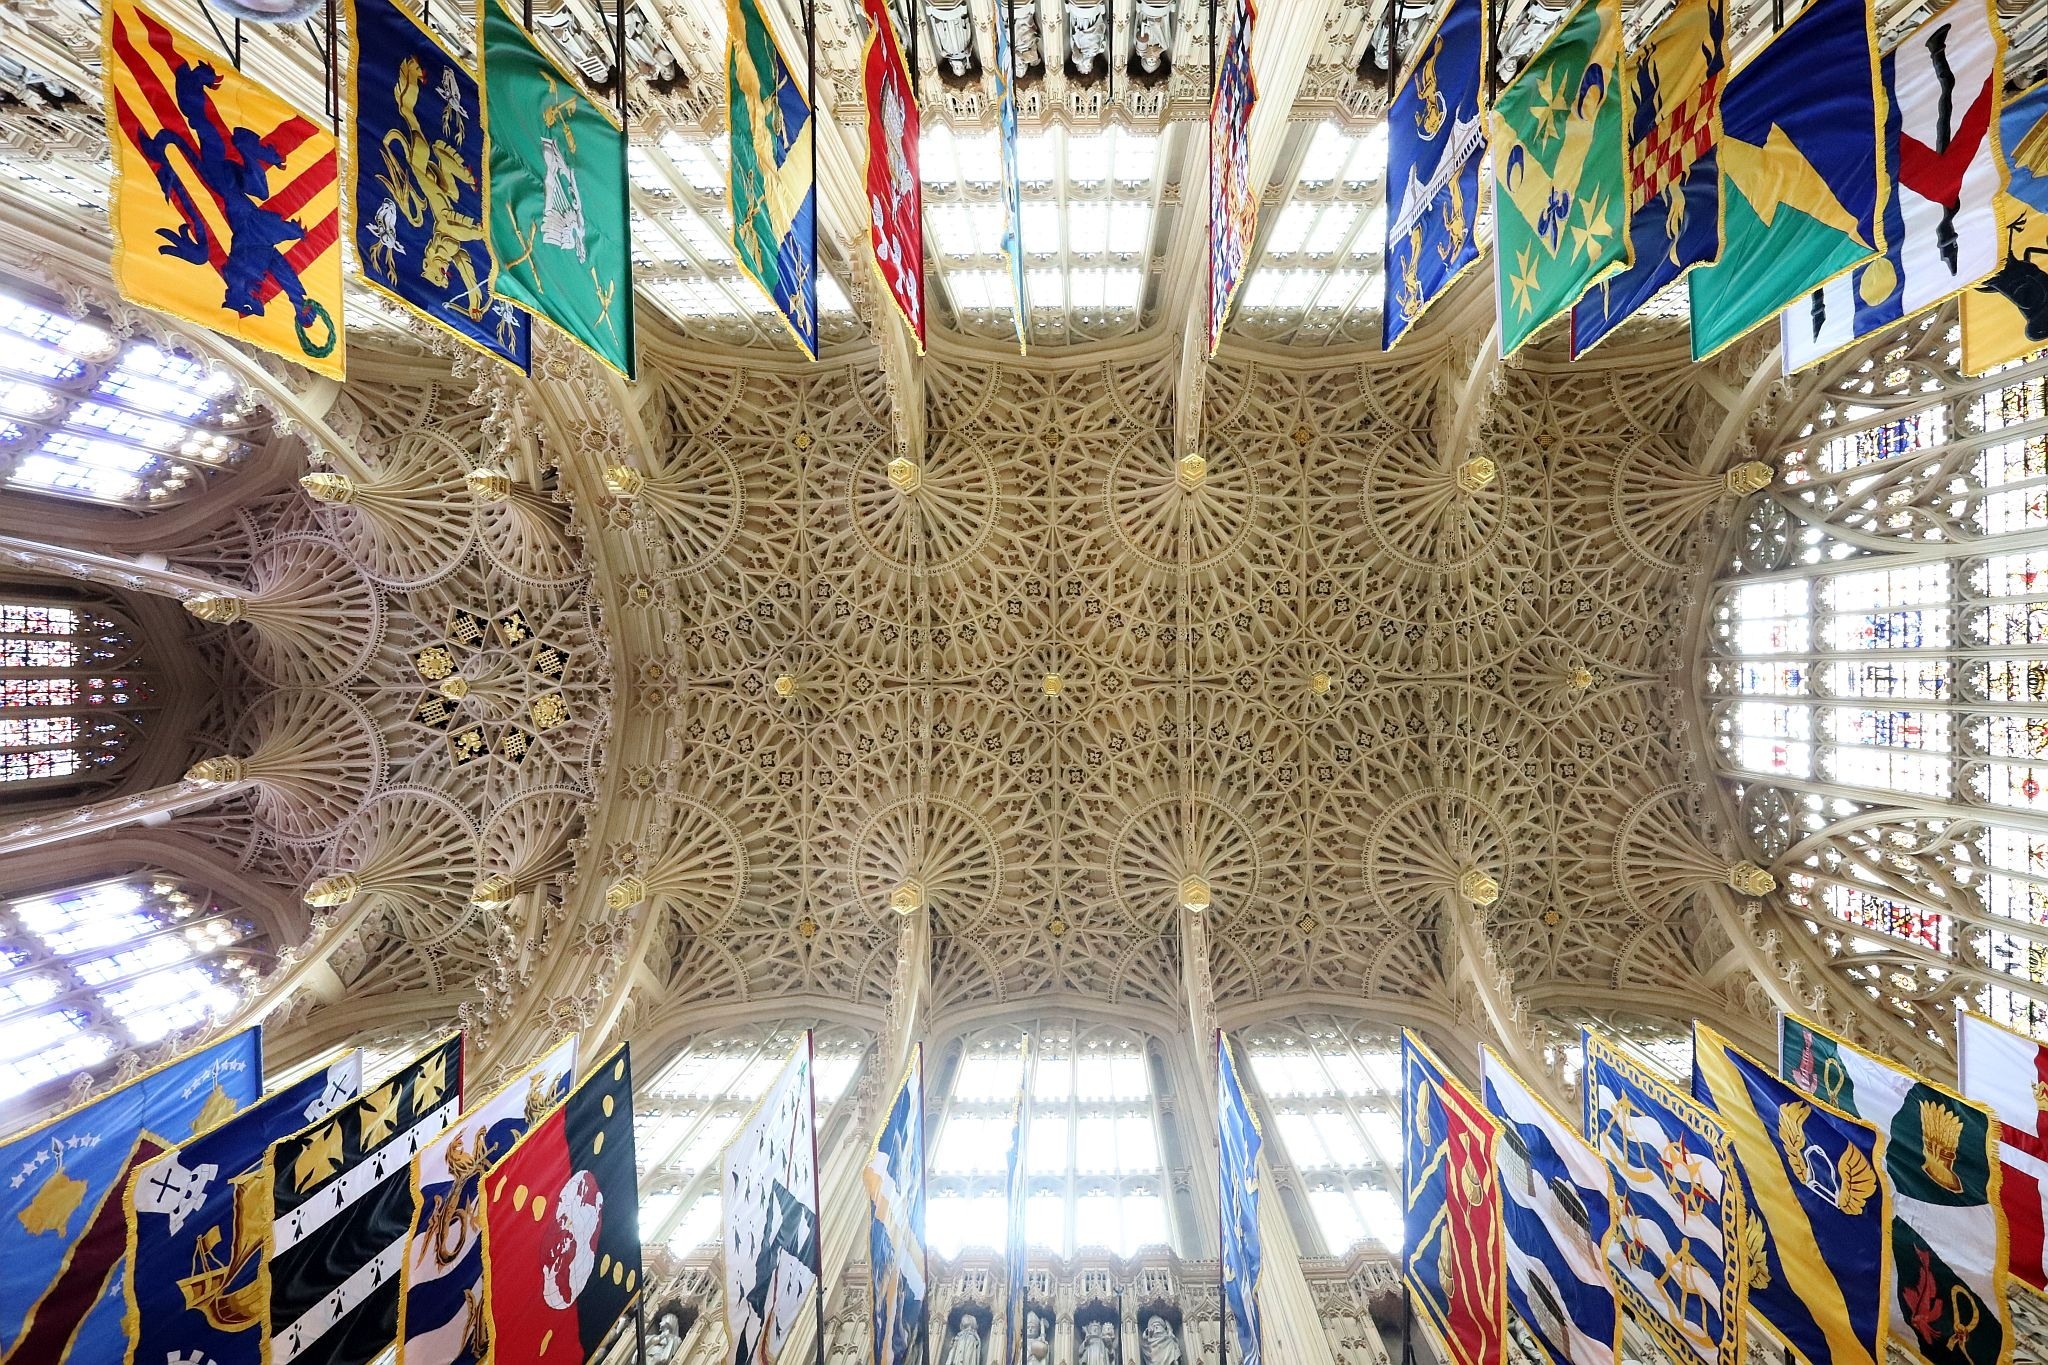 The roof of the Lady Chapel at the Eastern end of Westminster Abbey, overlooking the Houses of Parliament. The beautiful fan vaulted ceiling is framed by the colourful flags. Picture taken 13-May-2023. Ceiling.